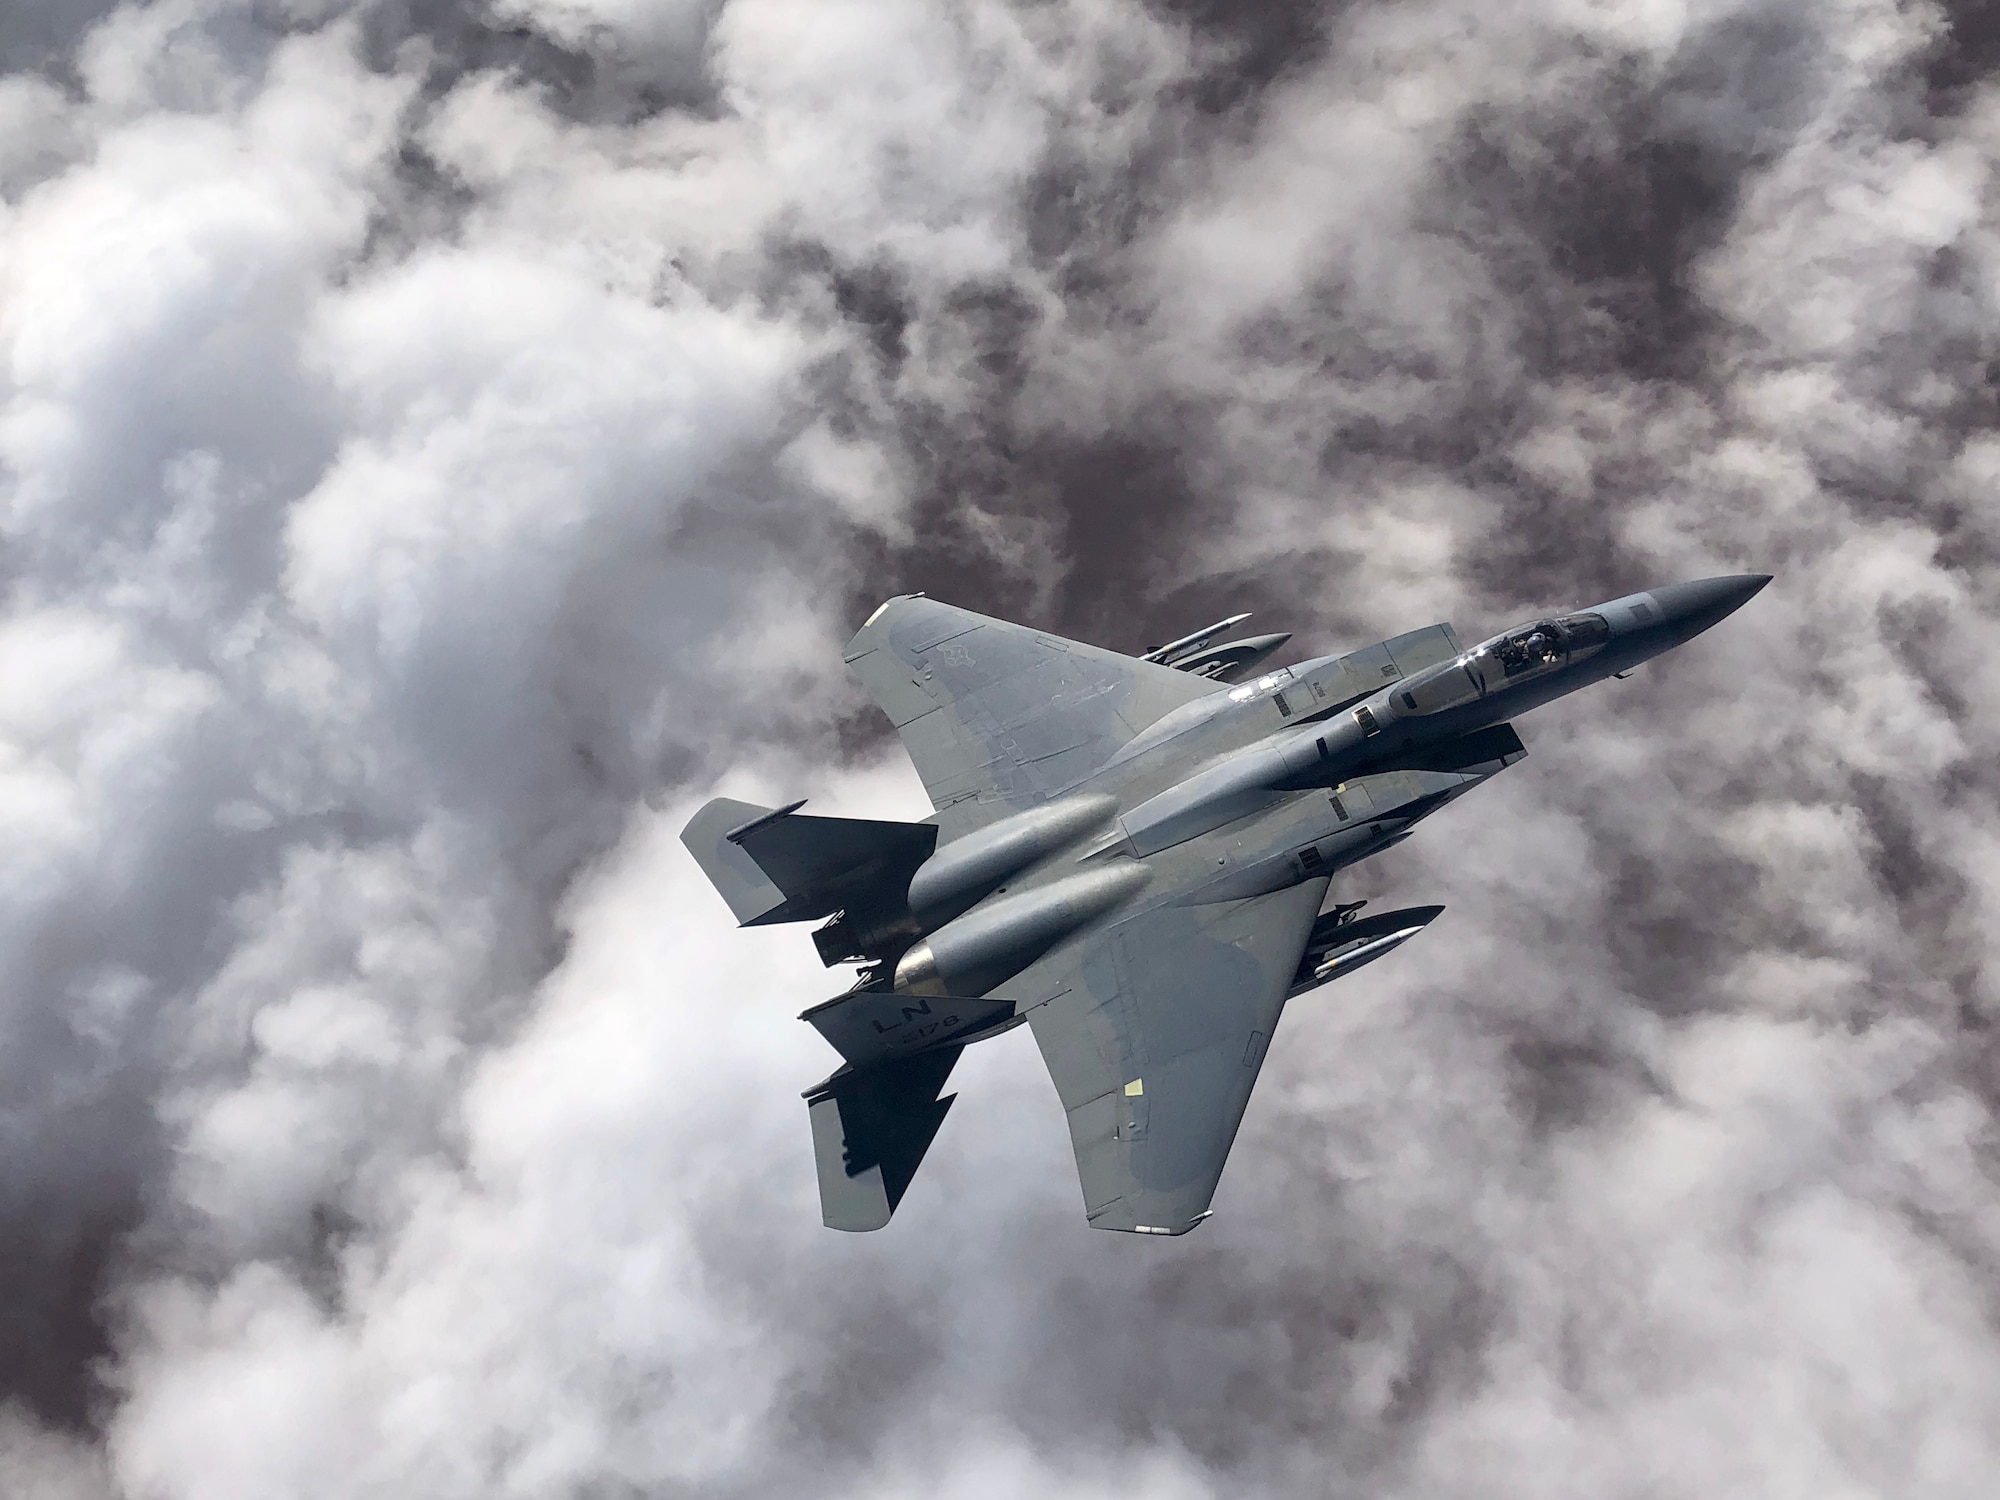 An F-15C Eagle flies over an undisclosed location in Southeast Asia in honor of the 493rd Fighter Squadron assumption of command for incoming commander Lt. Col. Anthony May during a mission supporting ongoing theater operations, February 28, 2019. The 493rd is a combat-ready squadron capable of executing air superiority and air defense missions in support of United States Air Forces in Europe, United States European Command, and NATO operations. (Courtesy photo)